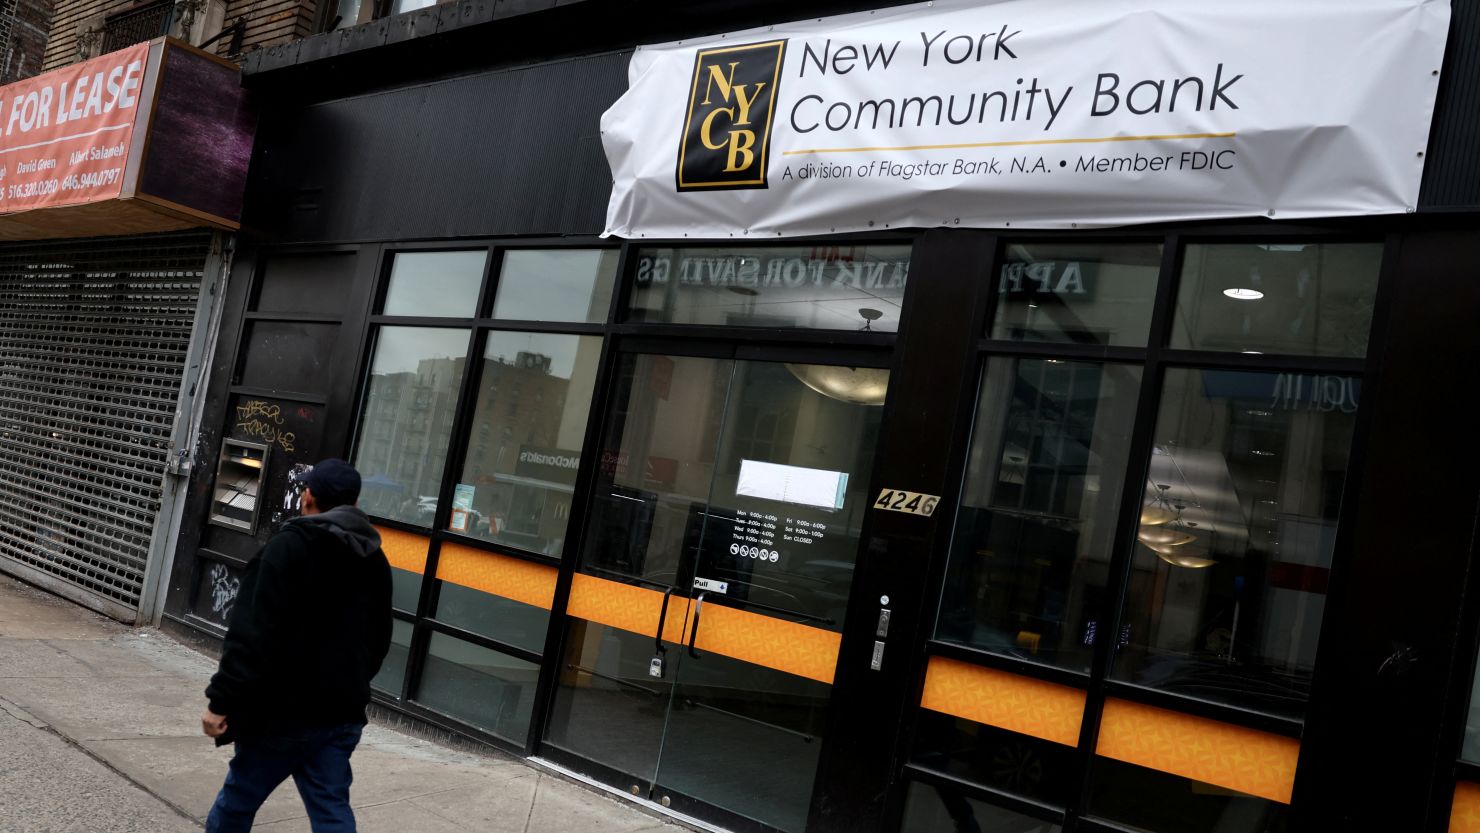 Shares of New York Community Bancorp got slammed Wednesday after the company reported an unexpectedly high loss last quarter.